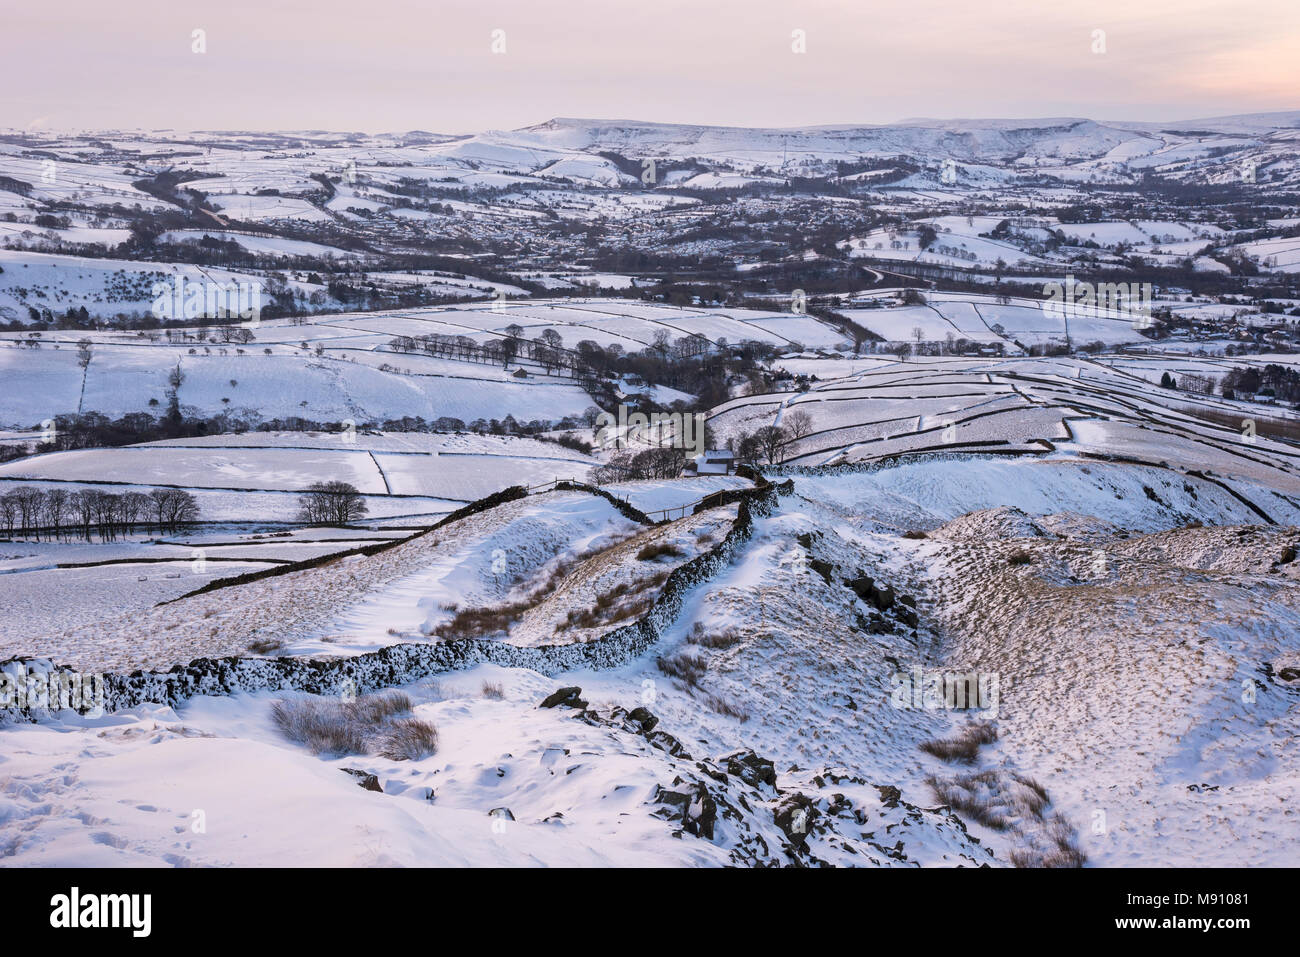 View to Chapel-en-le-frith on a cold snowy morning, Derbyshire, England. Stock Photo